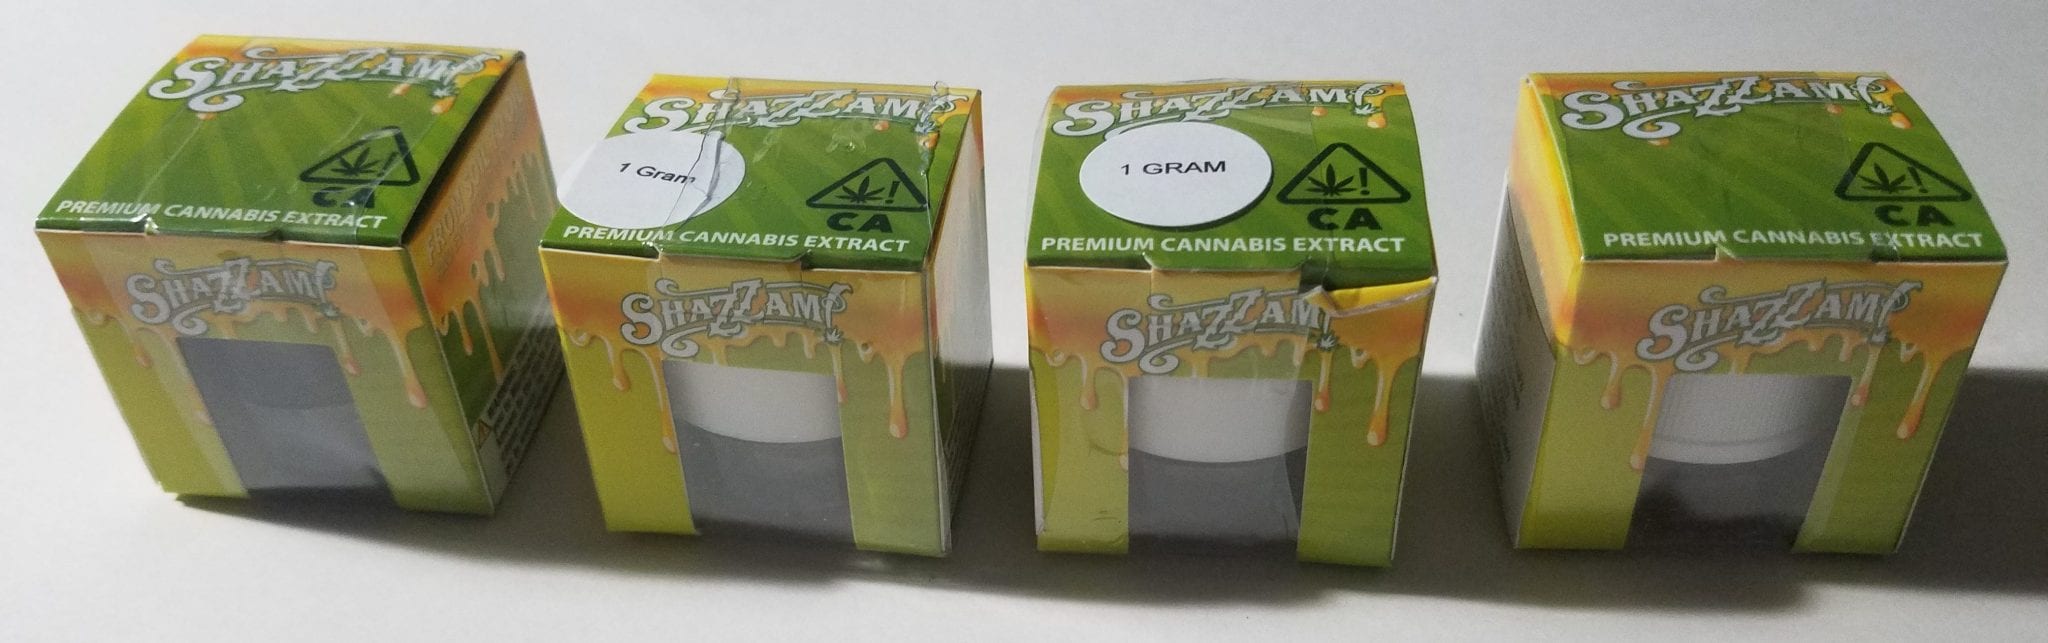 Shazzam Farms live resins in packaging